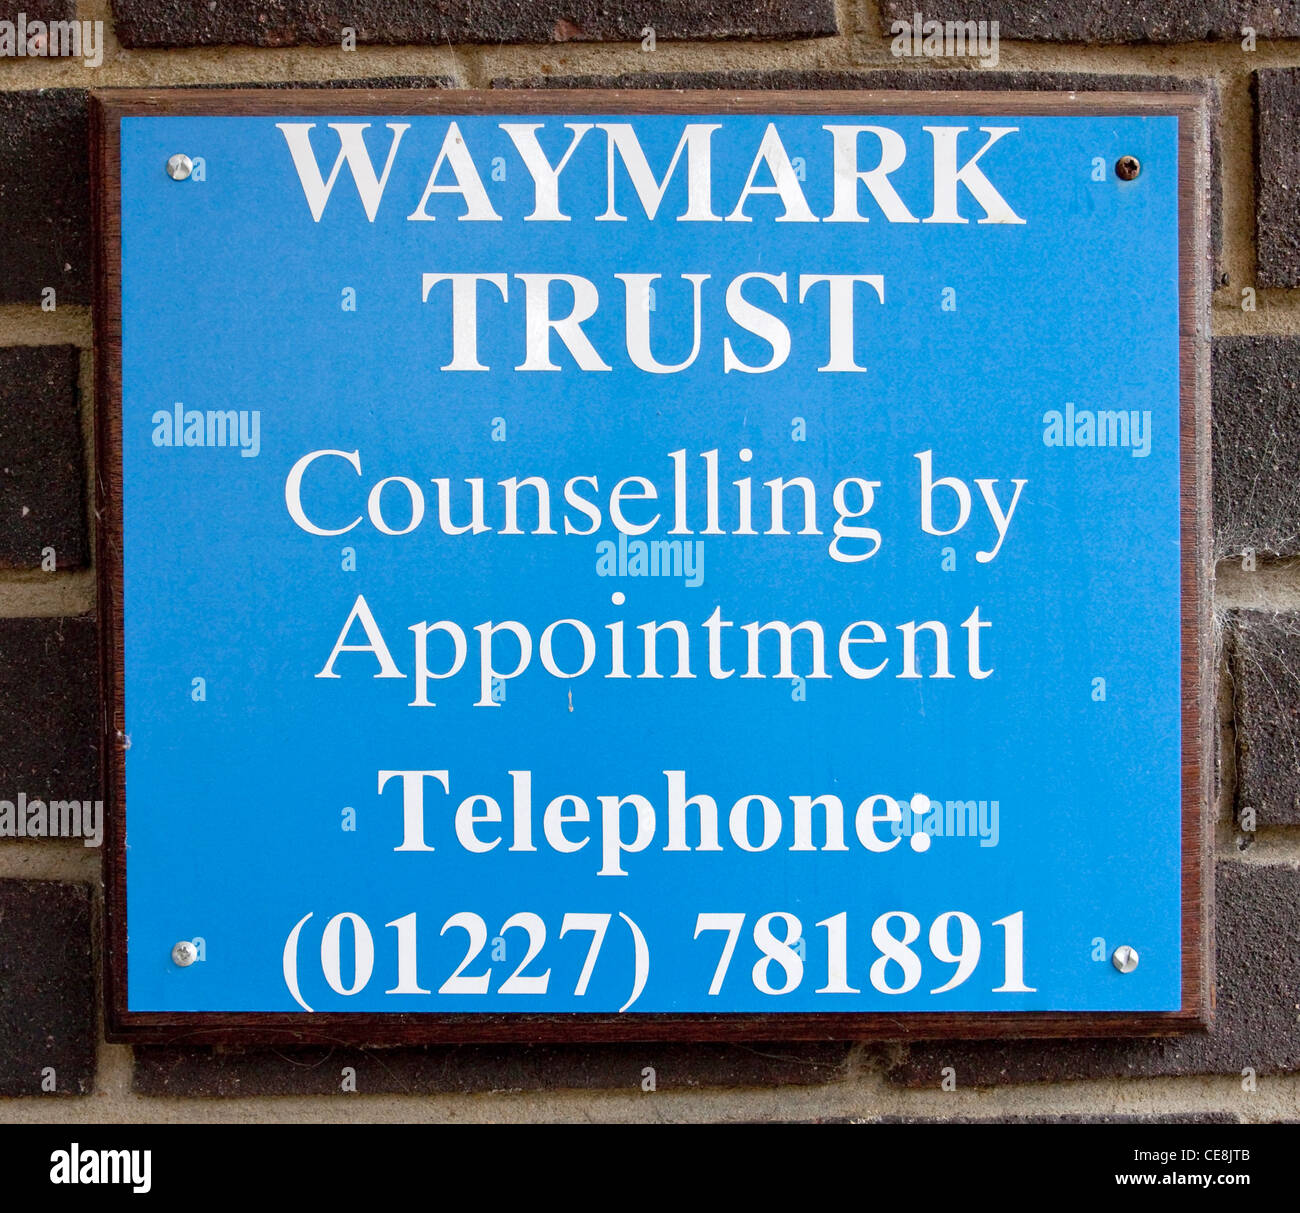 Waymark Trust Counselling Sign Stock Photo